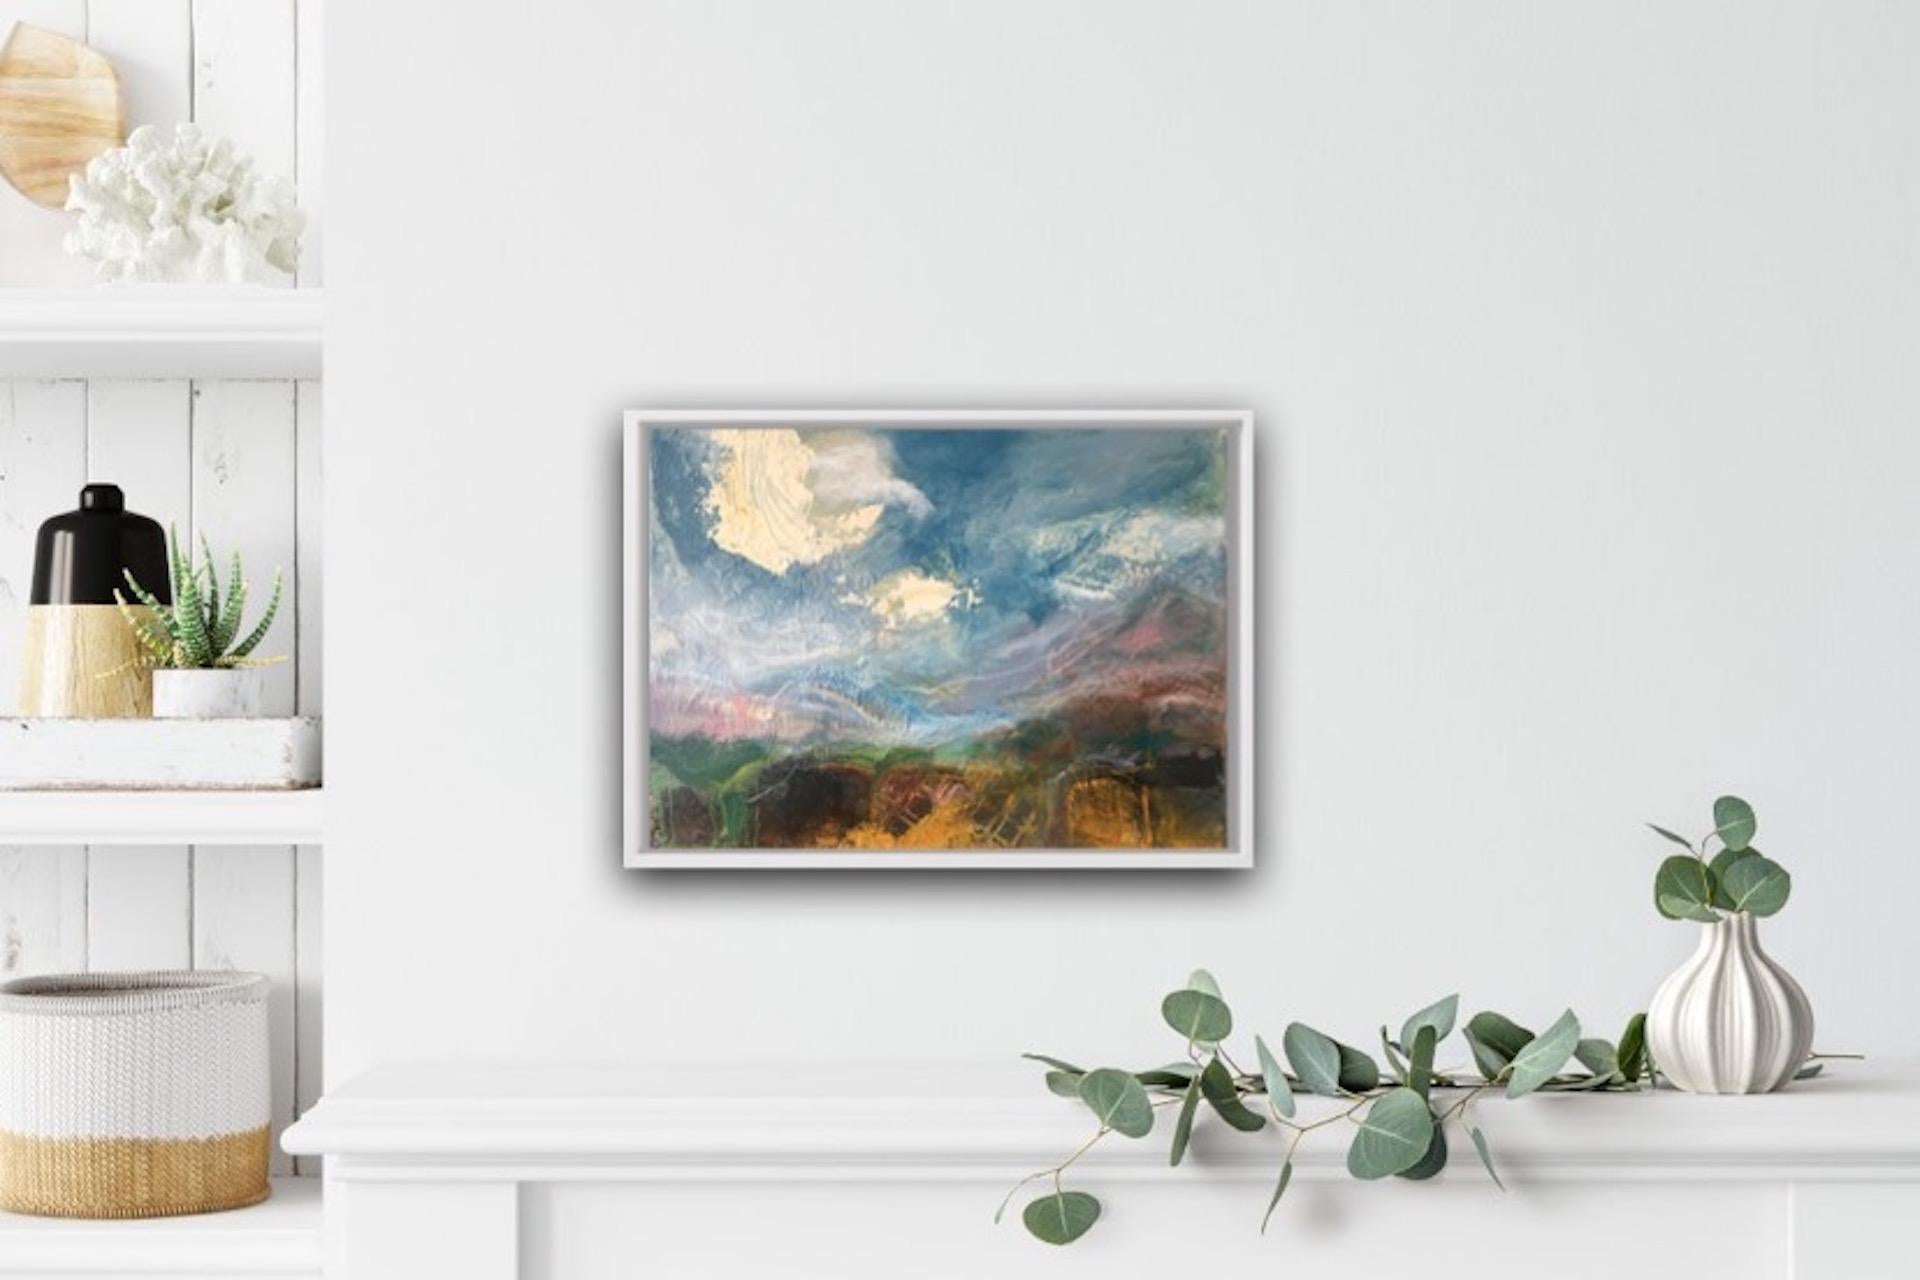 Sarah Russell
Blow the Wind Southerly
Original Landscape Painting
Acylic on Canvas
Size: H 33cm x W 43cm
Sold in a White Float Frame
(Please note that in situ images are purely an indication of how a piece may look).

Blow the Wind Southerly by